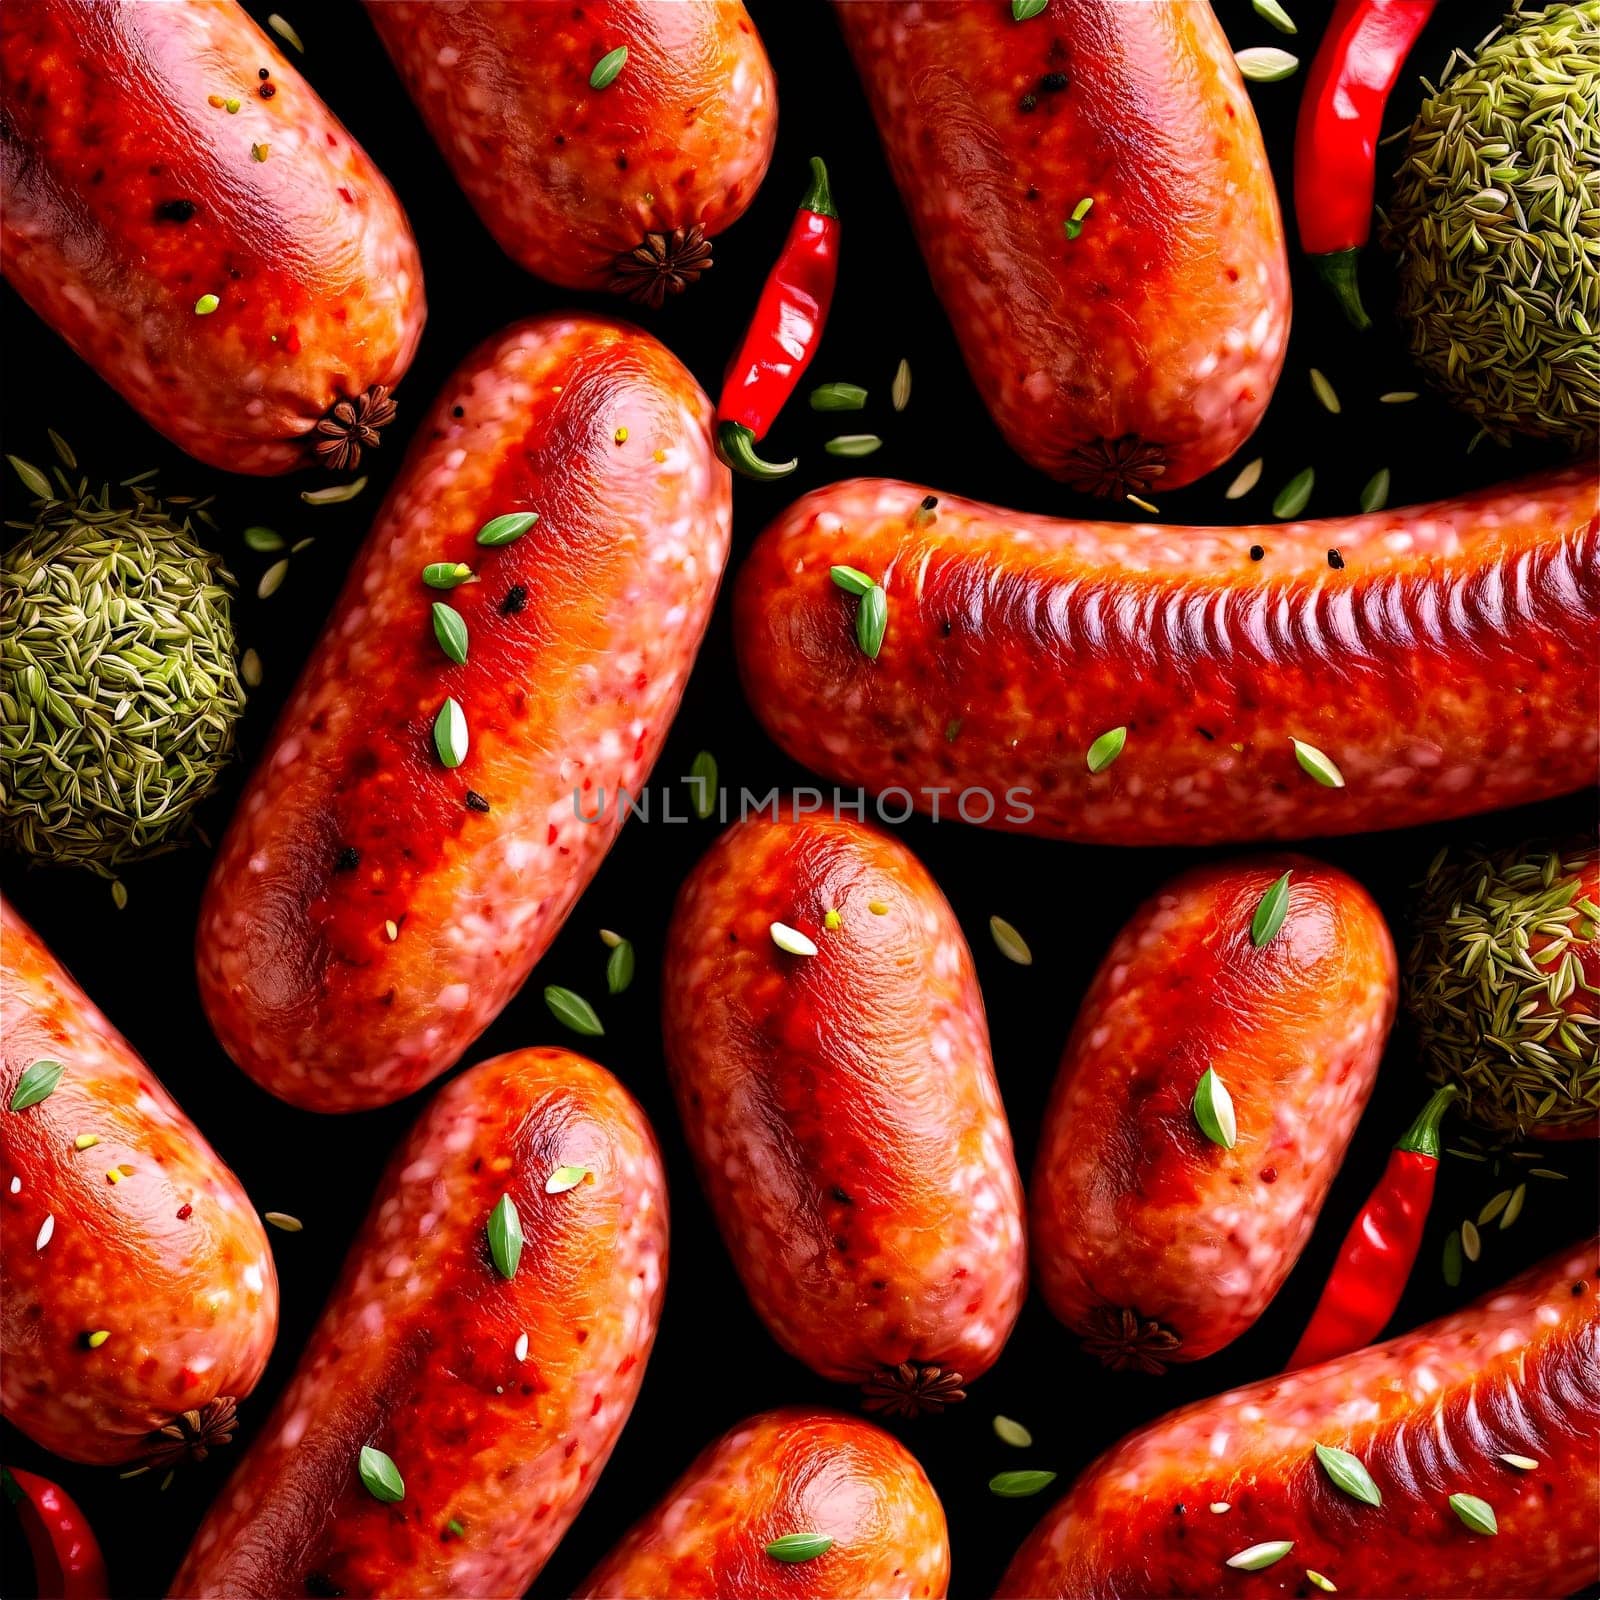 Sausage links plump and uncooked with fennel seeds and red pepper flakes tumbling in by panophotograph